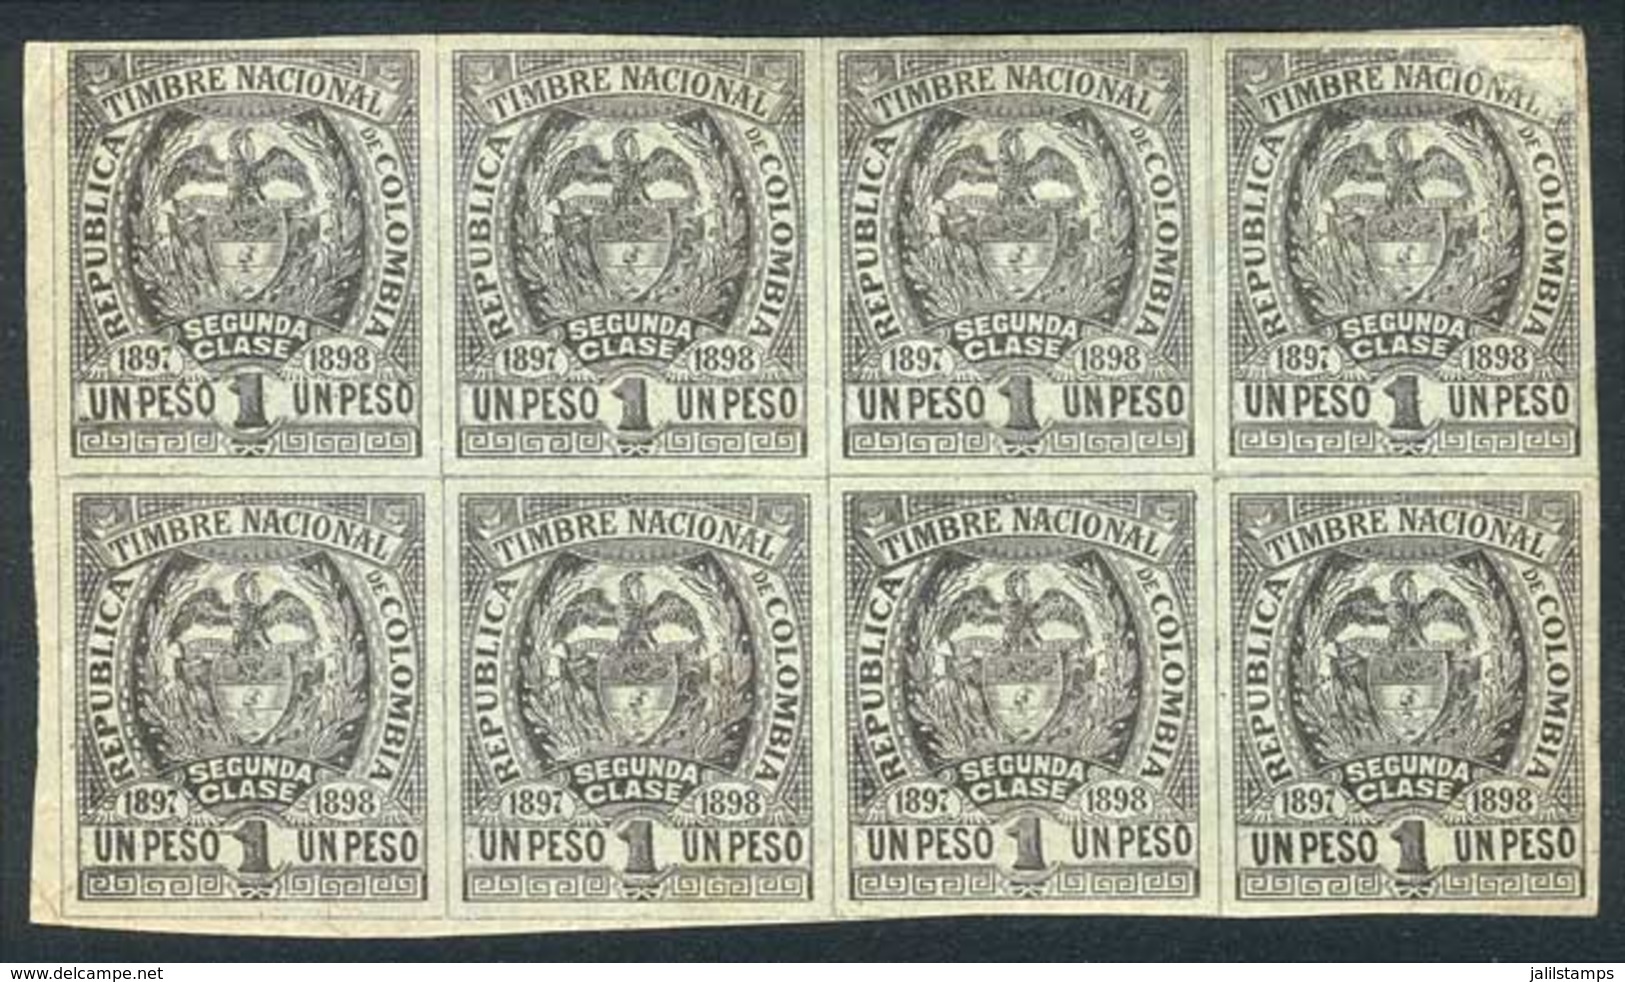 COLOMBIA: Timbre Nacional, 1895-1896 1P. Third Class, Block Oof 8 Mint With Gum, Printed On Paper Of Unsurfaced Front, B - Colombia